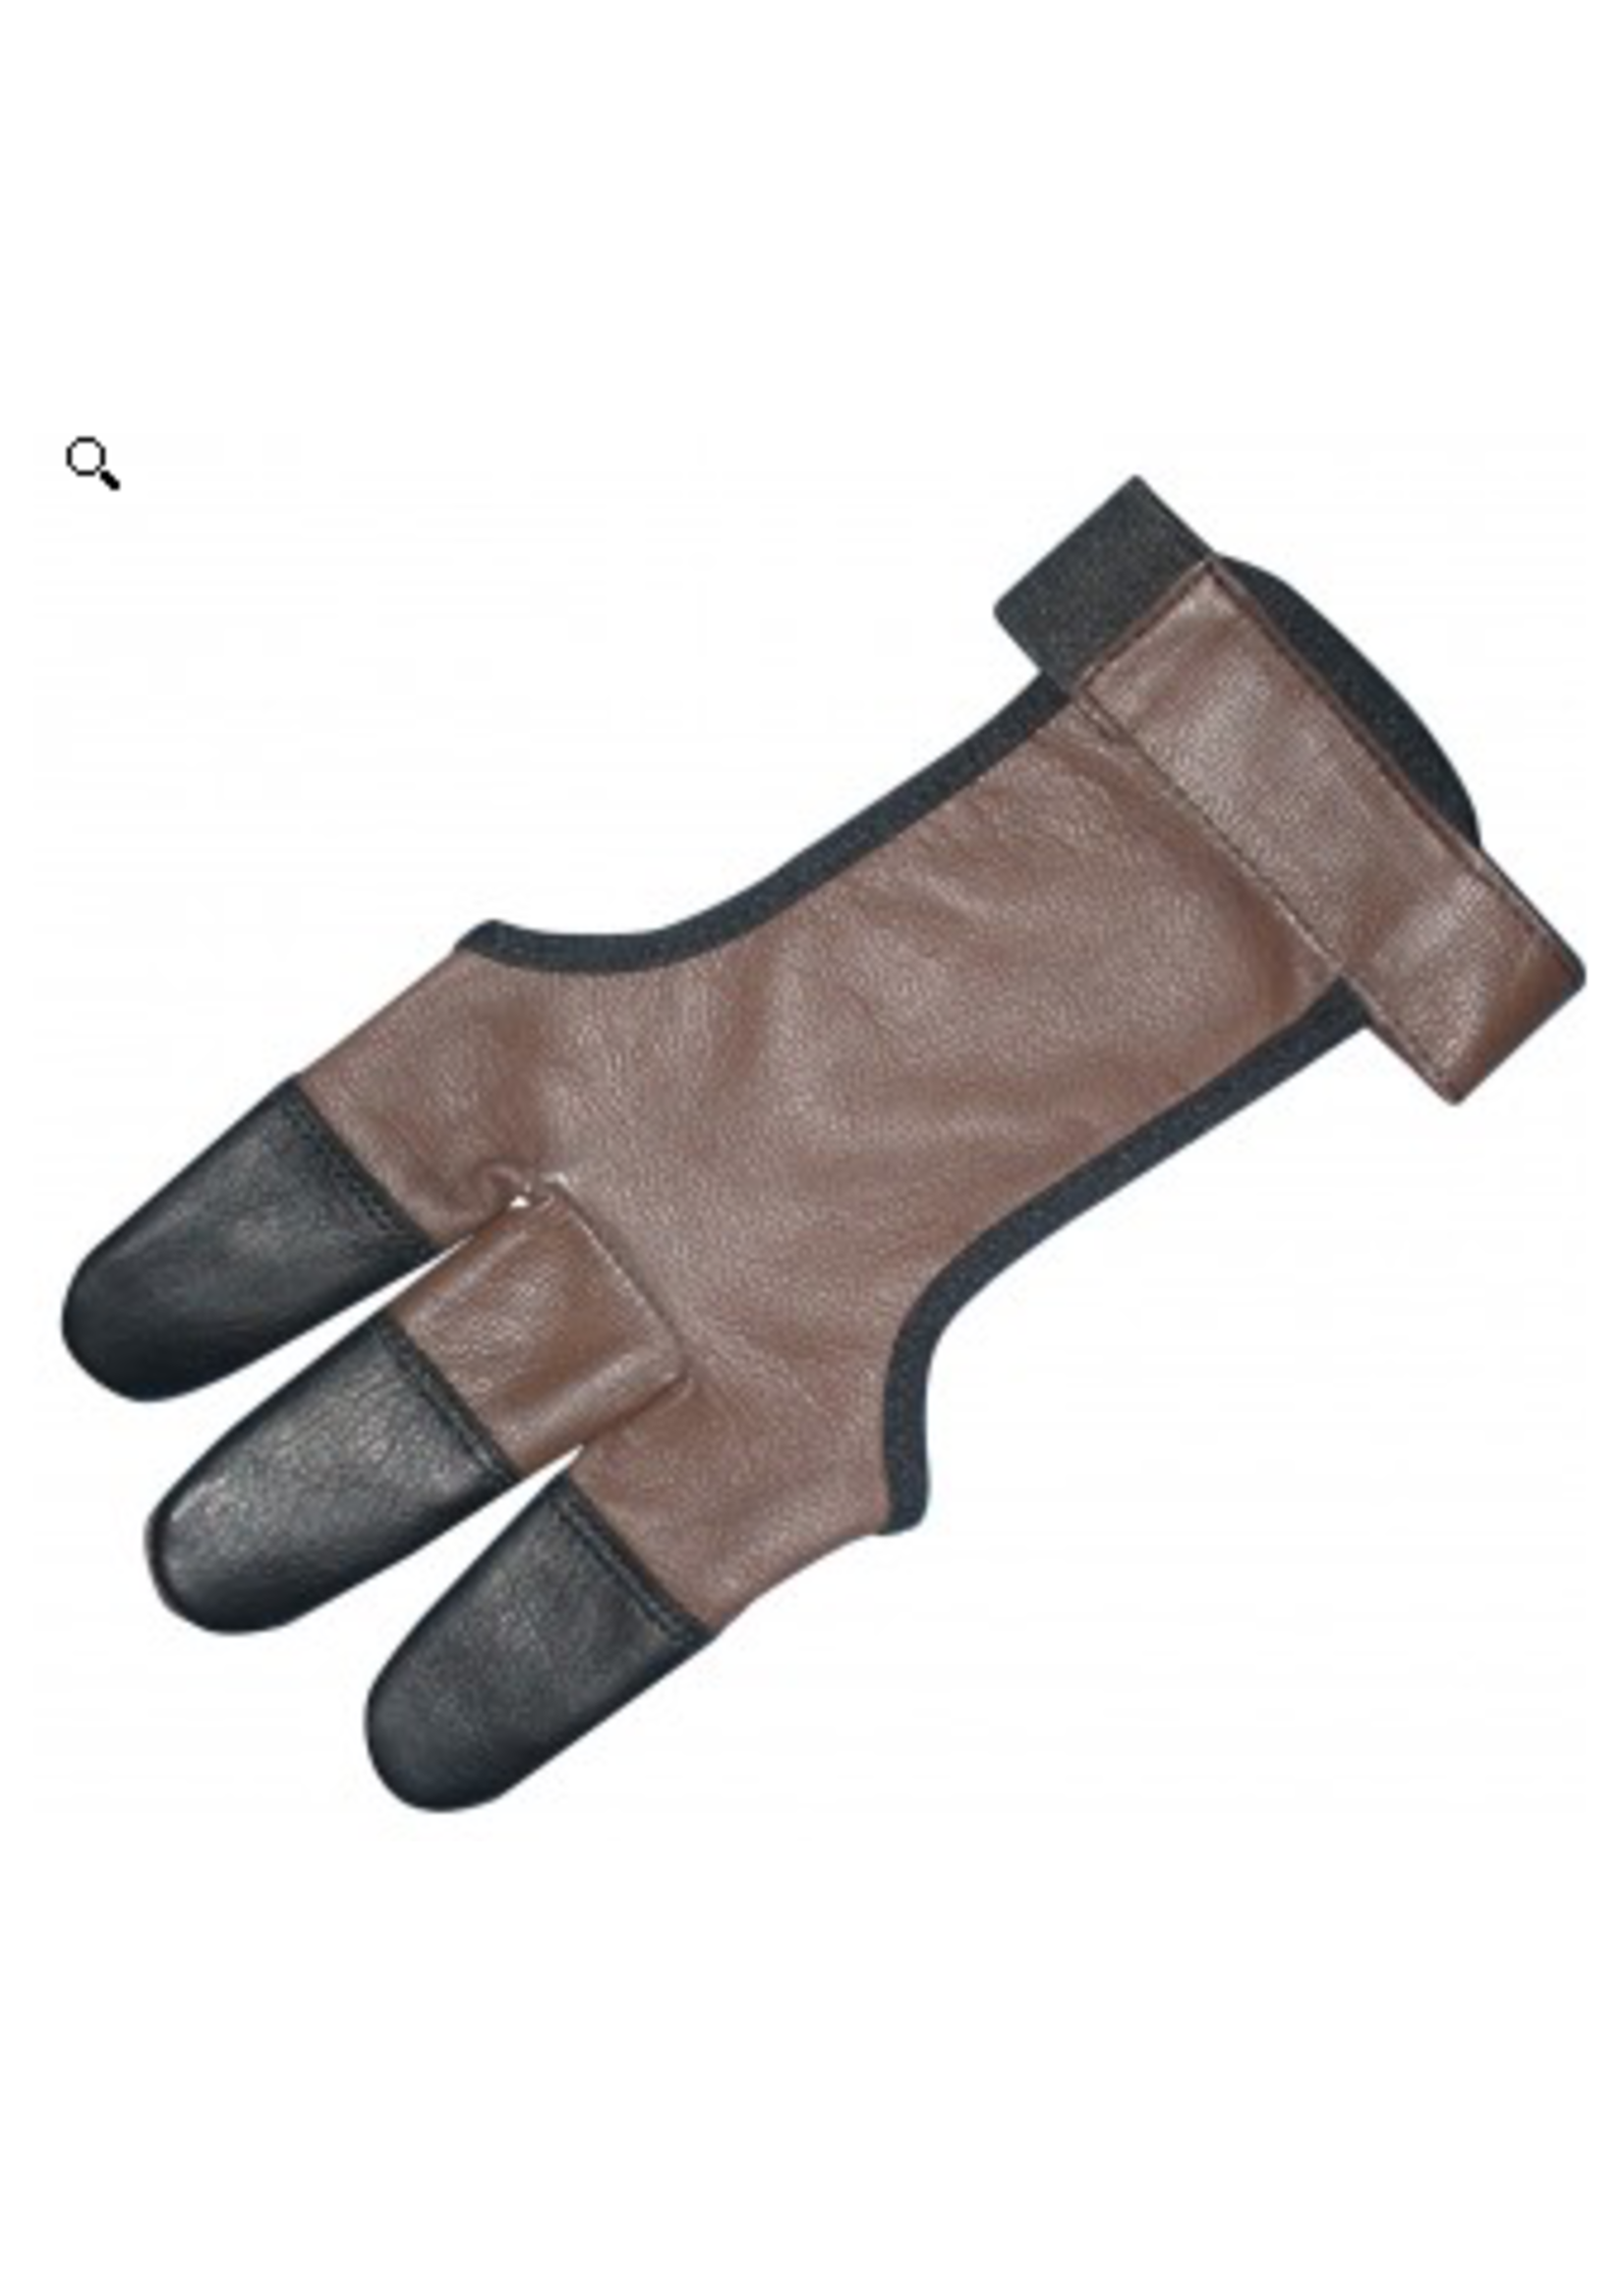 Legacy Legacy Full Leather Shootign Glove with Leather Tips